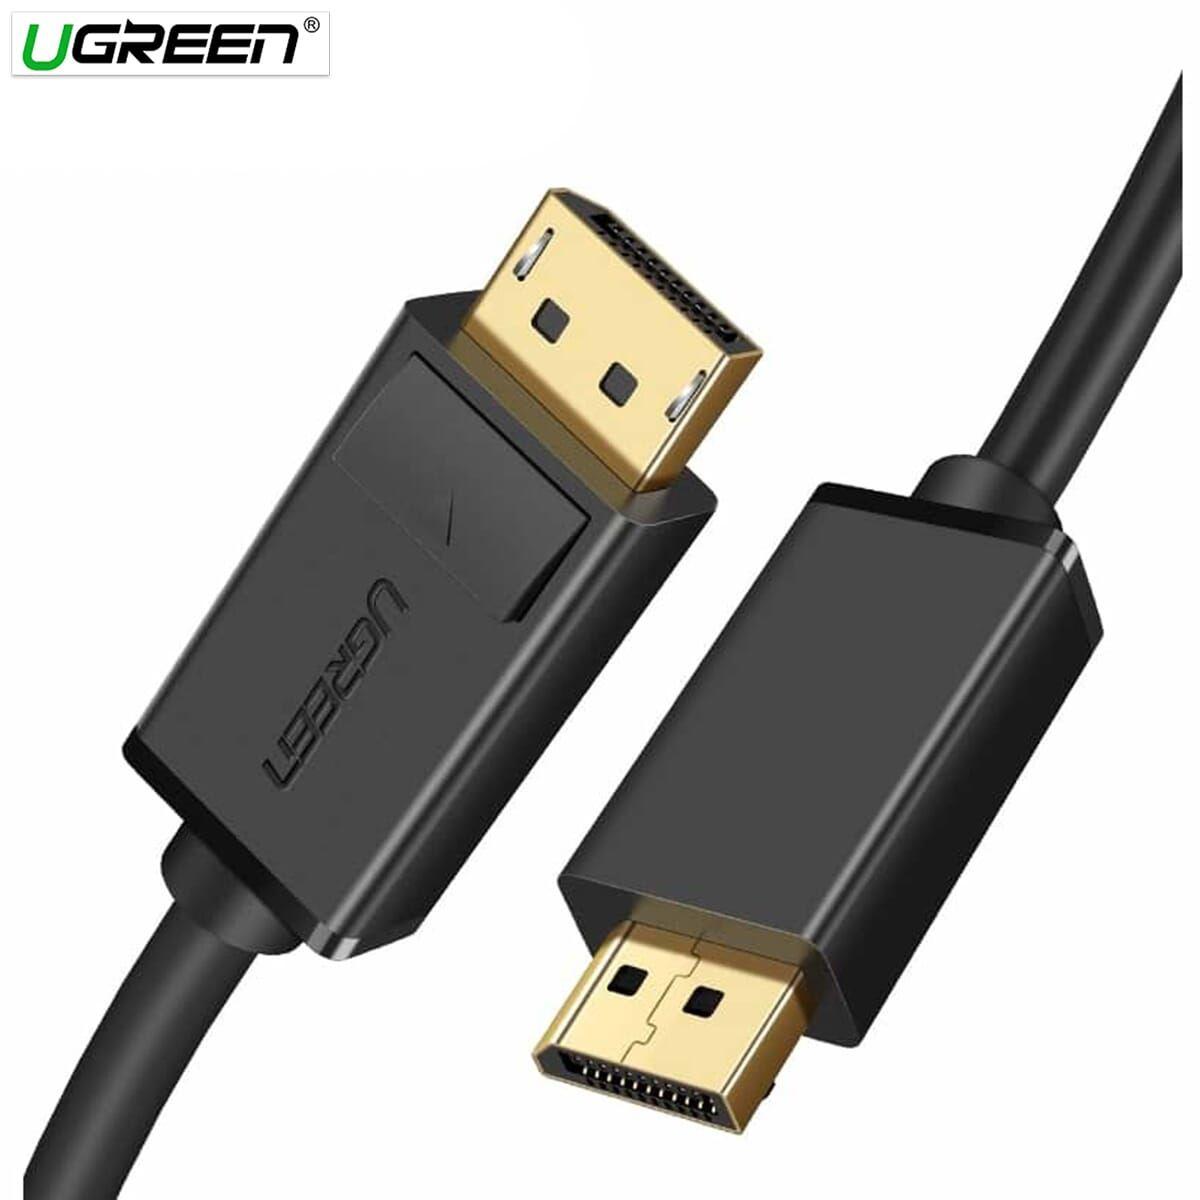 UGREEN 2 Mtr DP 1.2 Male To Male Cable Price Nepal